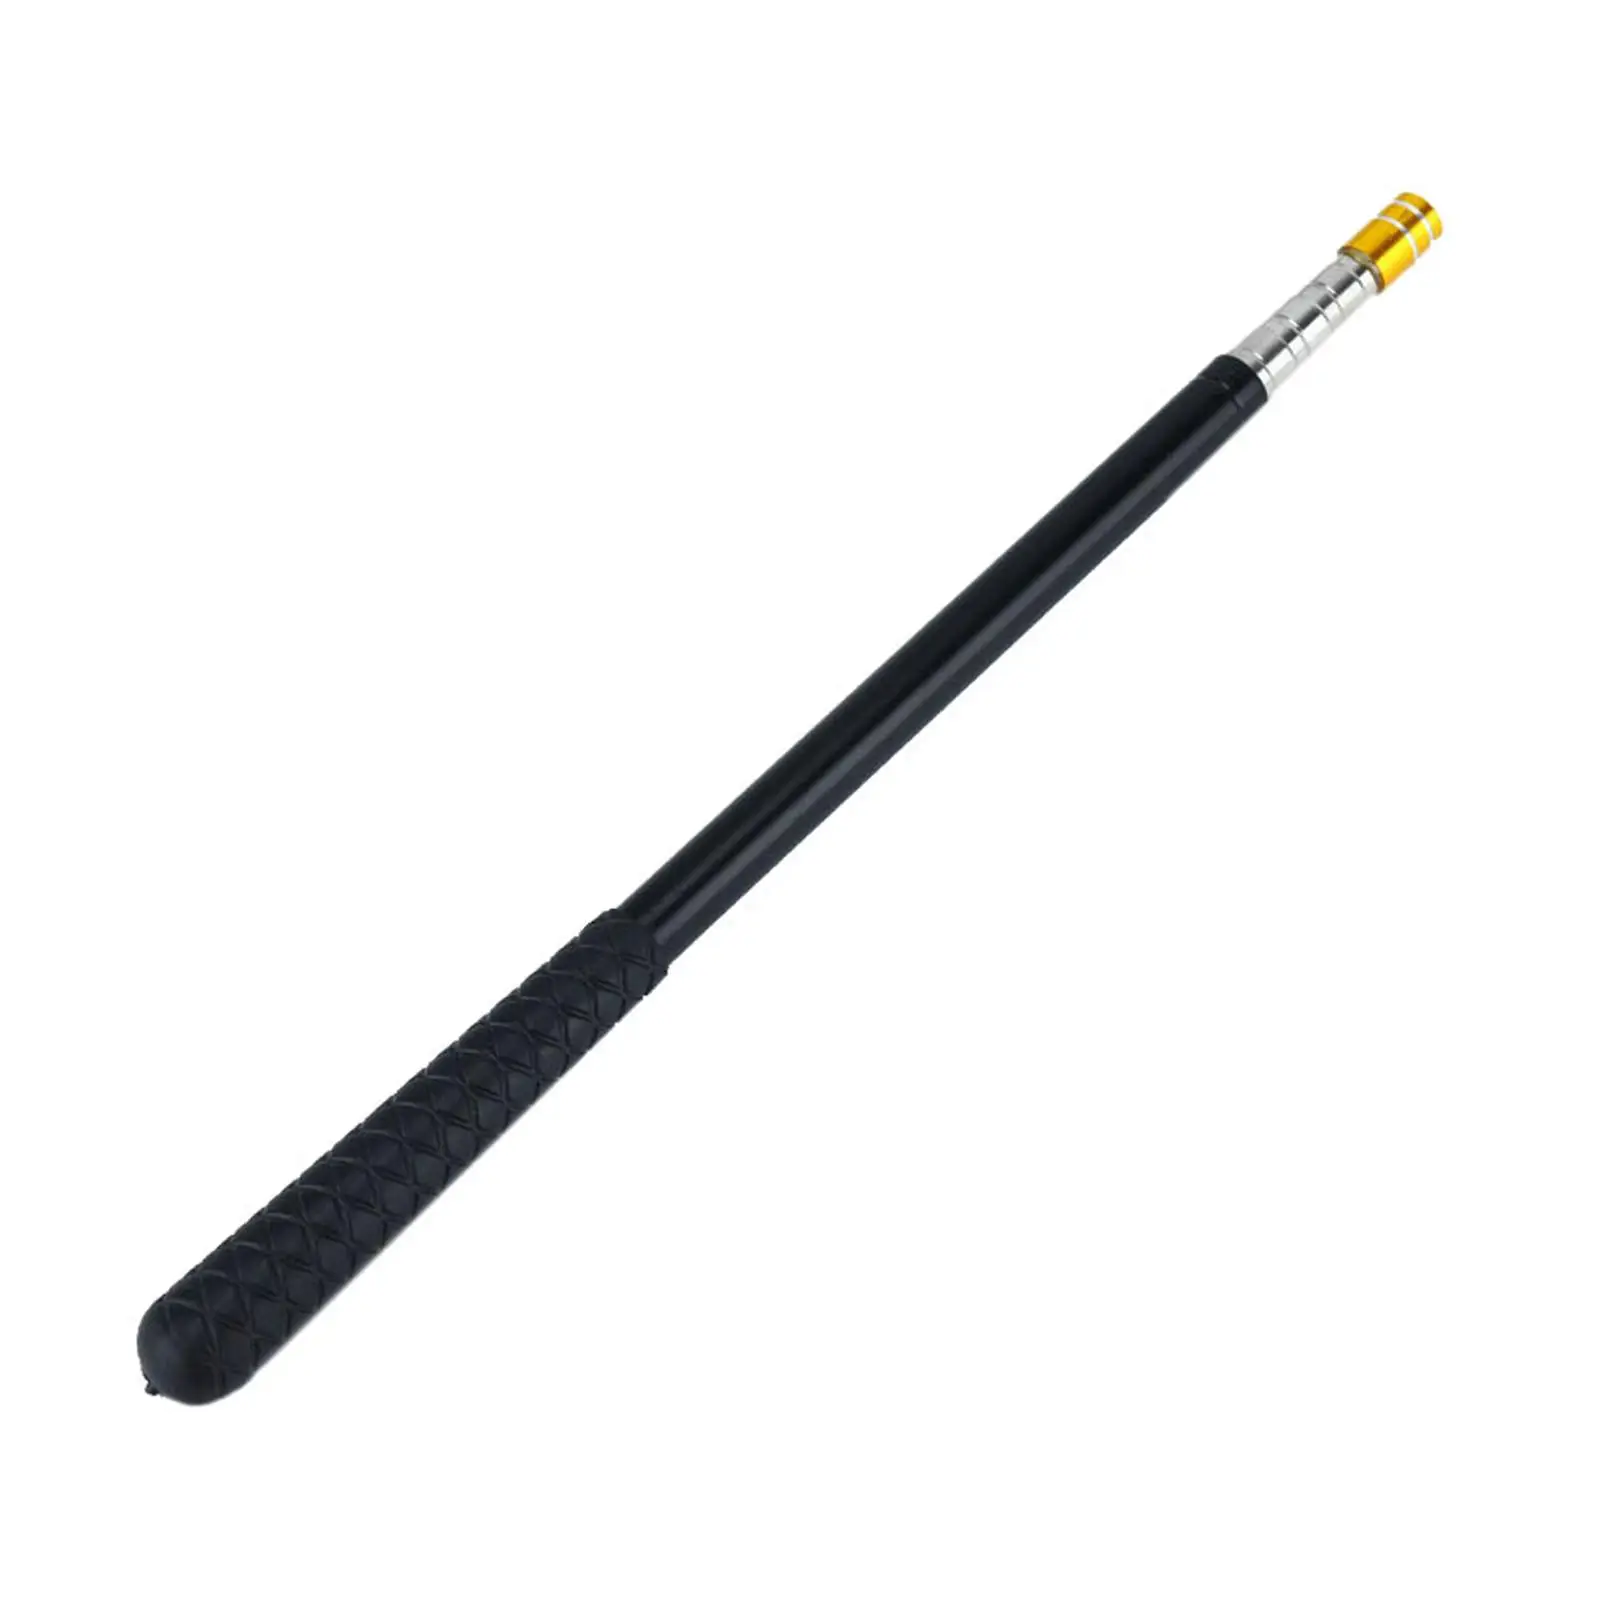 1.5M Fishing Net Pole Accs with 8mm Thread Connector Retractable Fishing Tackle Pole Telescopic Fishing Rod Landing Net Handle